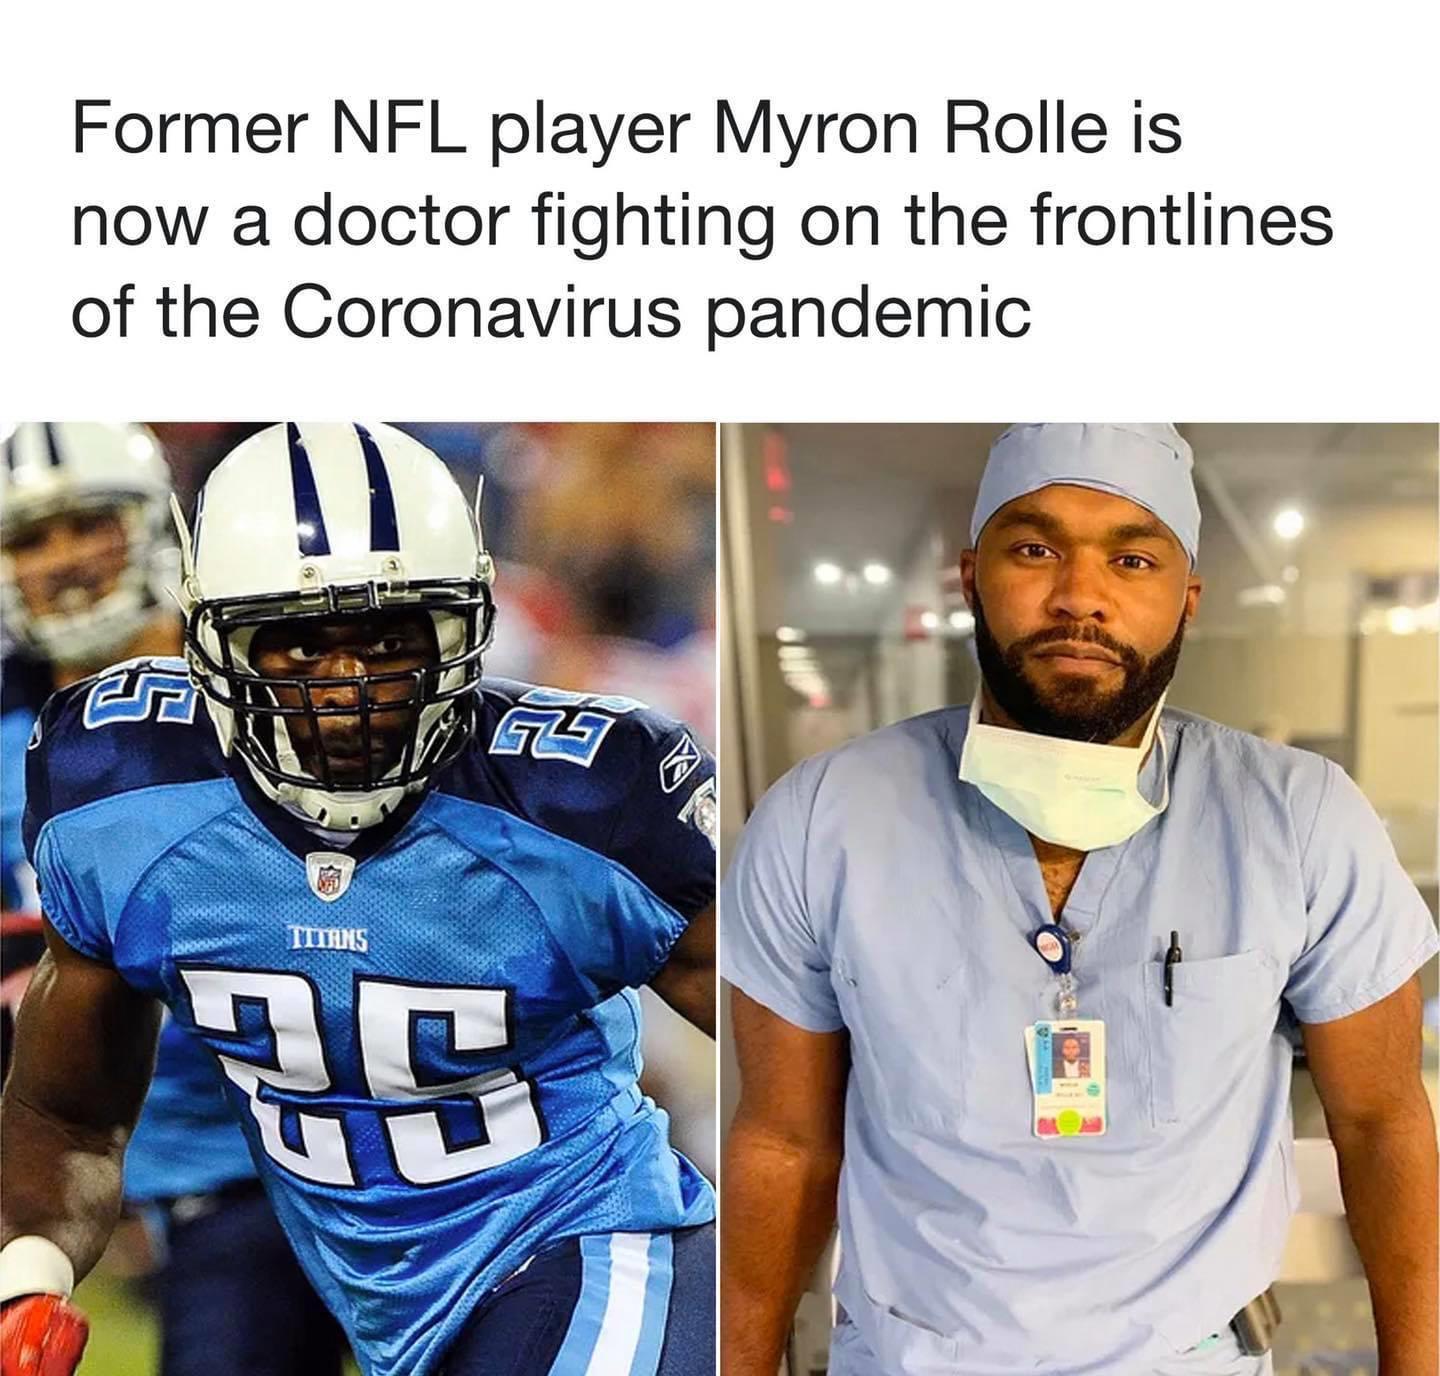 photo caption - Former Nfl player Myron Rolle is now a doctor fighting on the frontlines of the Coronavirus pandemic Timin